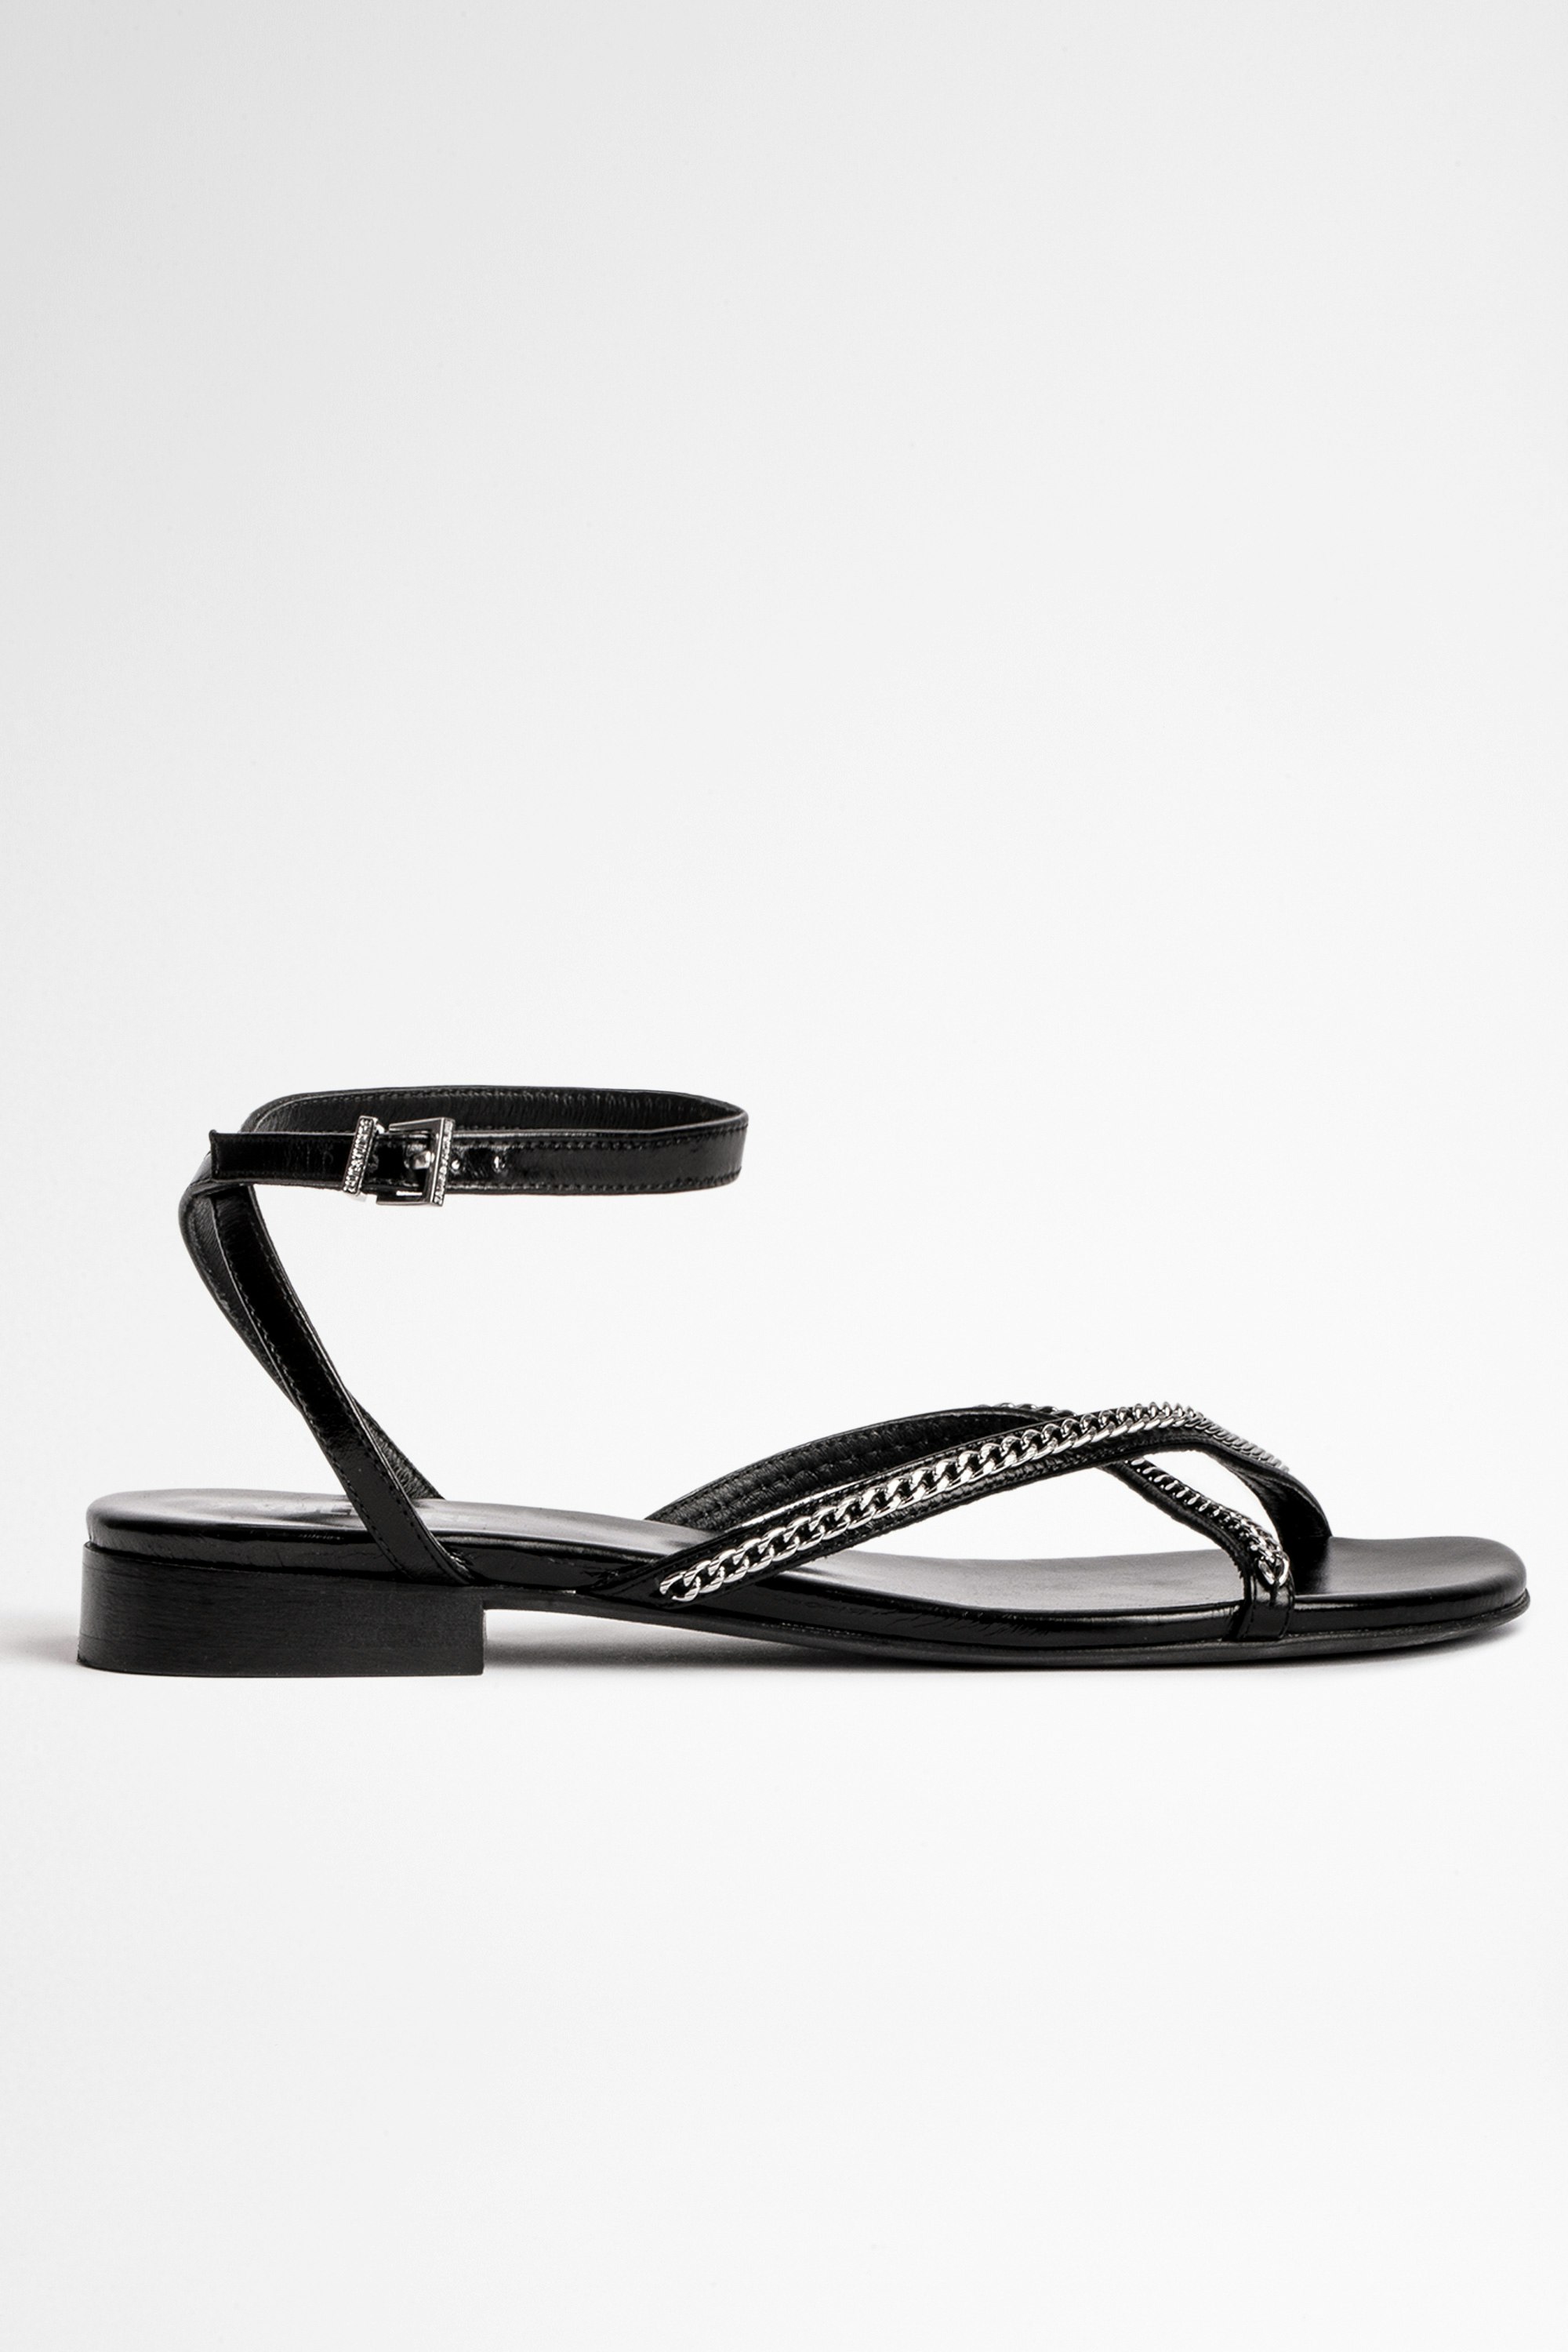 Rockzy Sandals Leather Women's flat sandals in black leather with chain straps